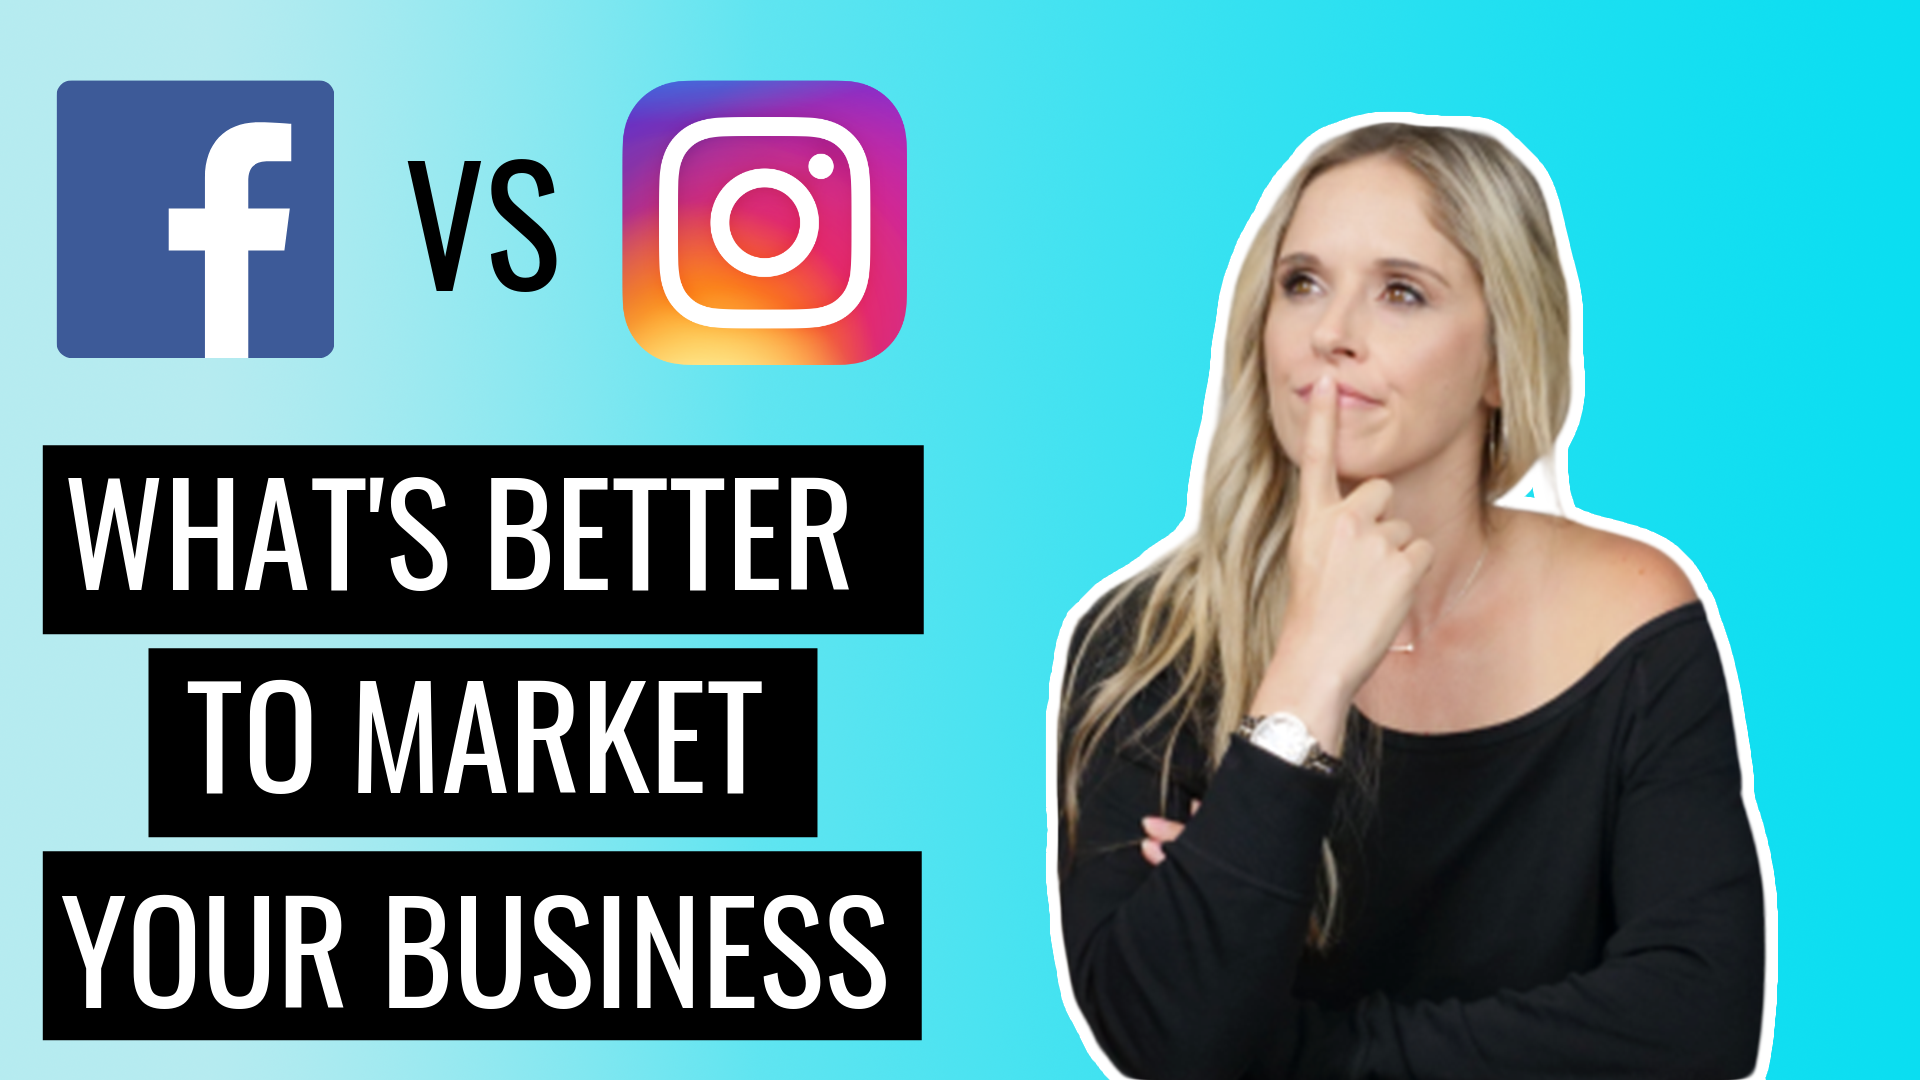 Facebook vs Instagram, What’s Better to Market Your Business?